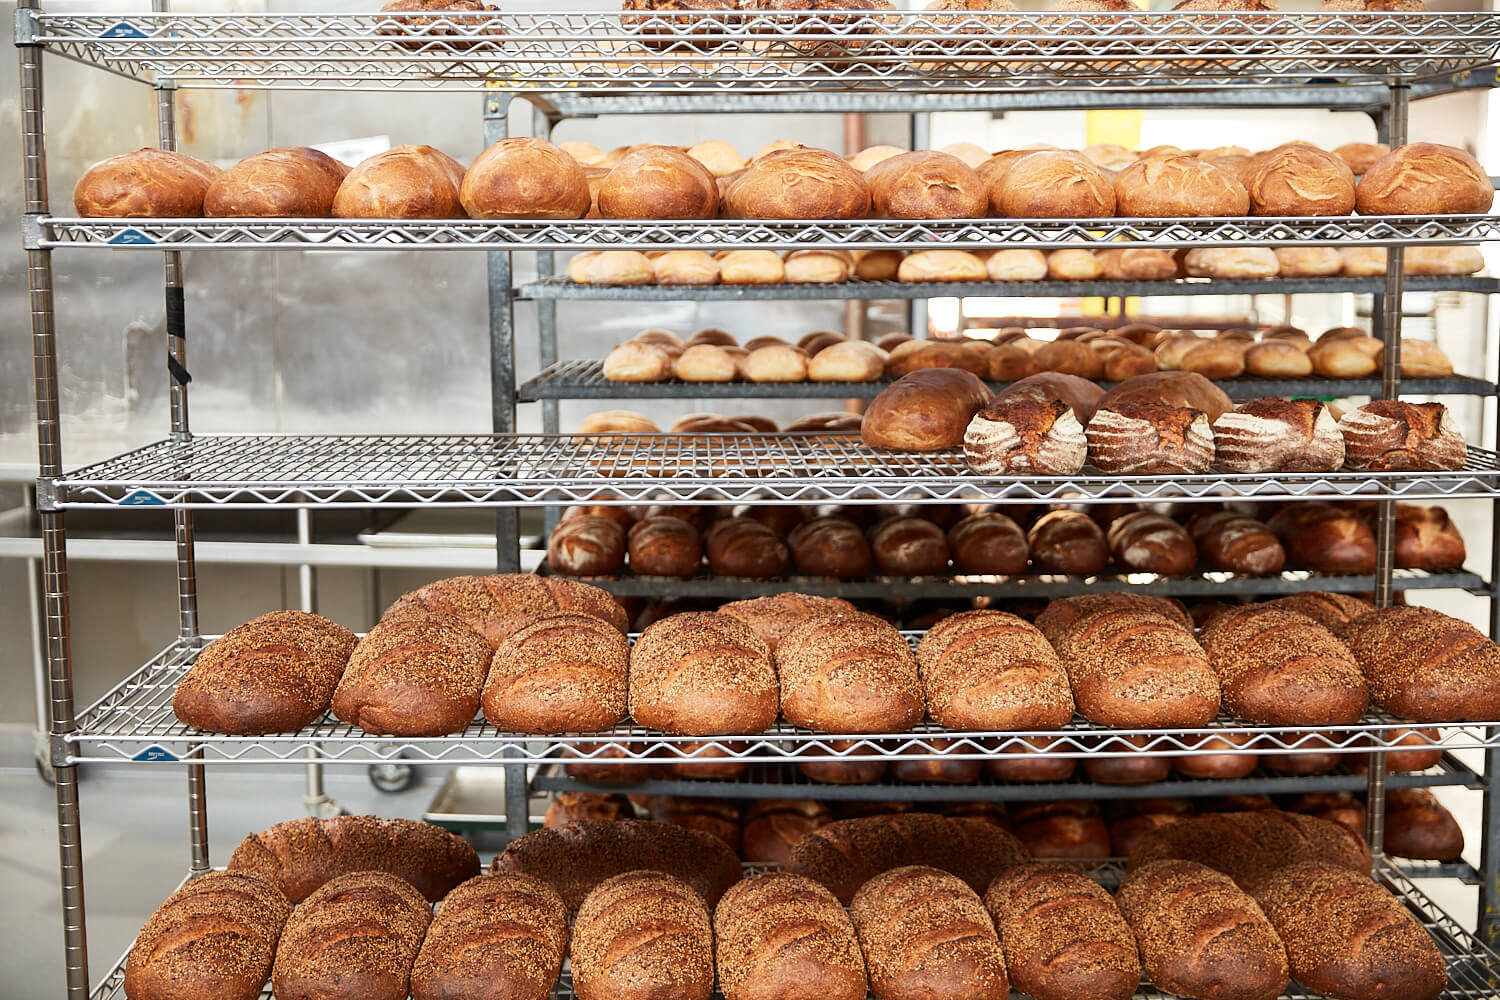 A view of a trolley full of a variety of freshly baked loaves from Starter Bakery. In the background are more trolleys full of more fresh loaves